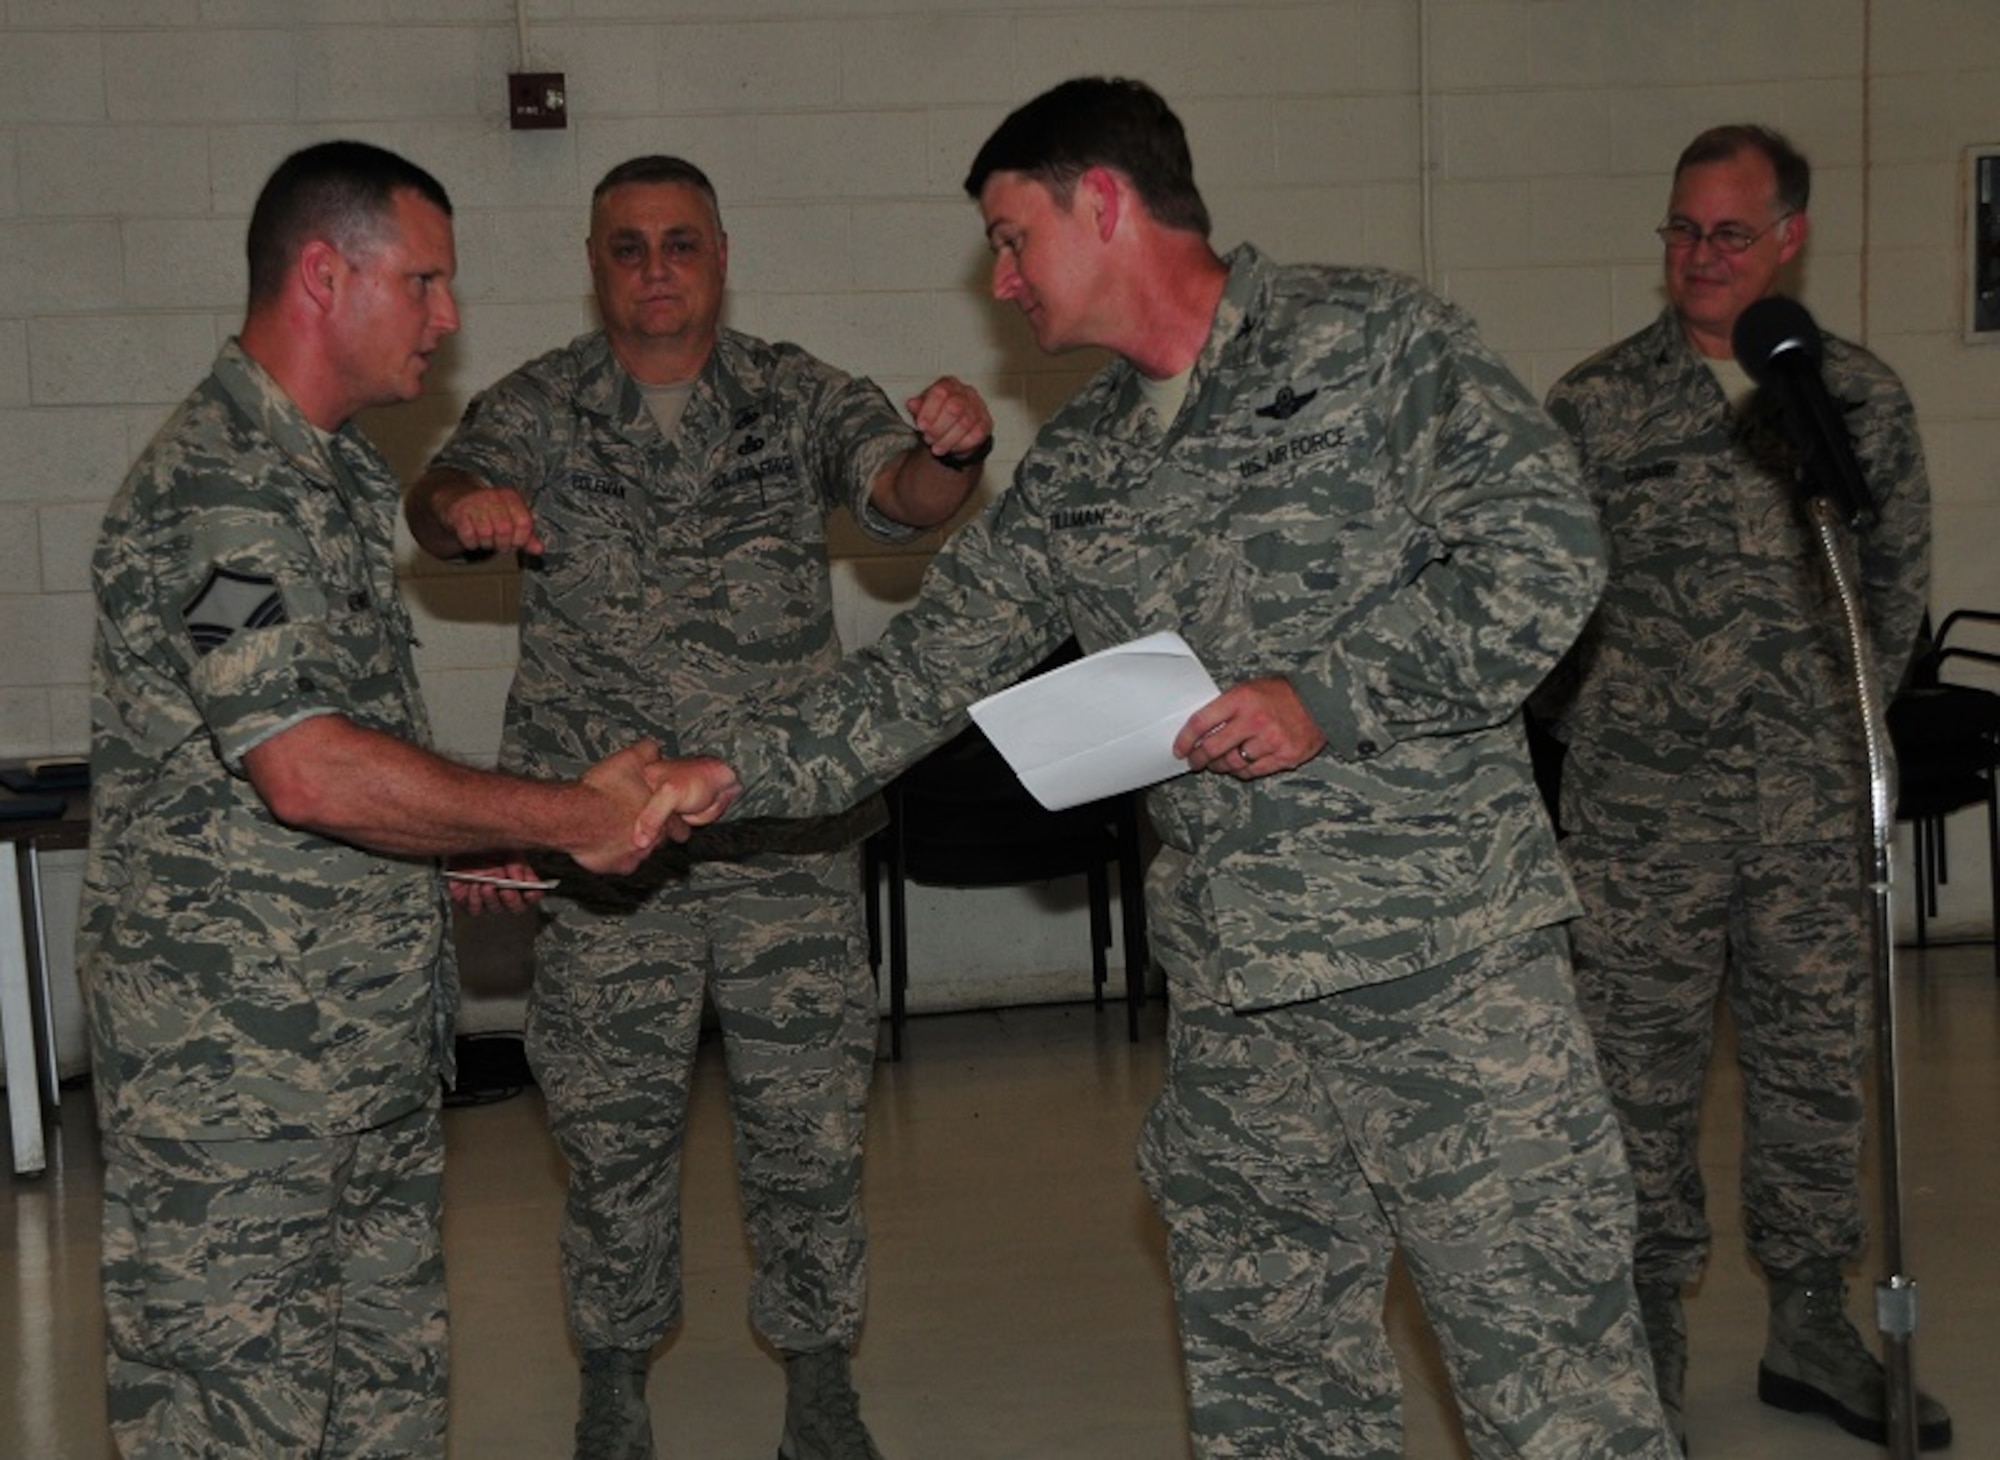 172d Airlift Wing Maintenance Group member, Master Sgt. Brian Kennedy (left) has has been named the Air National Guard's 2013 CMSAF Thomas N. Barnes Crew Chief of the Year Award winner.  Kennedy is shown being congratulated by 172d Vice Wing Commander, Col Tommy Tillman.  The announcement marks the first time that a Mississippi National Guardsmen has won the award.